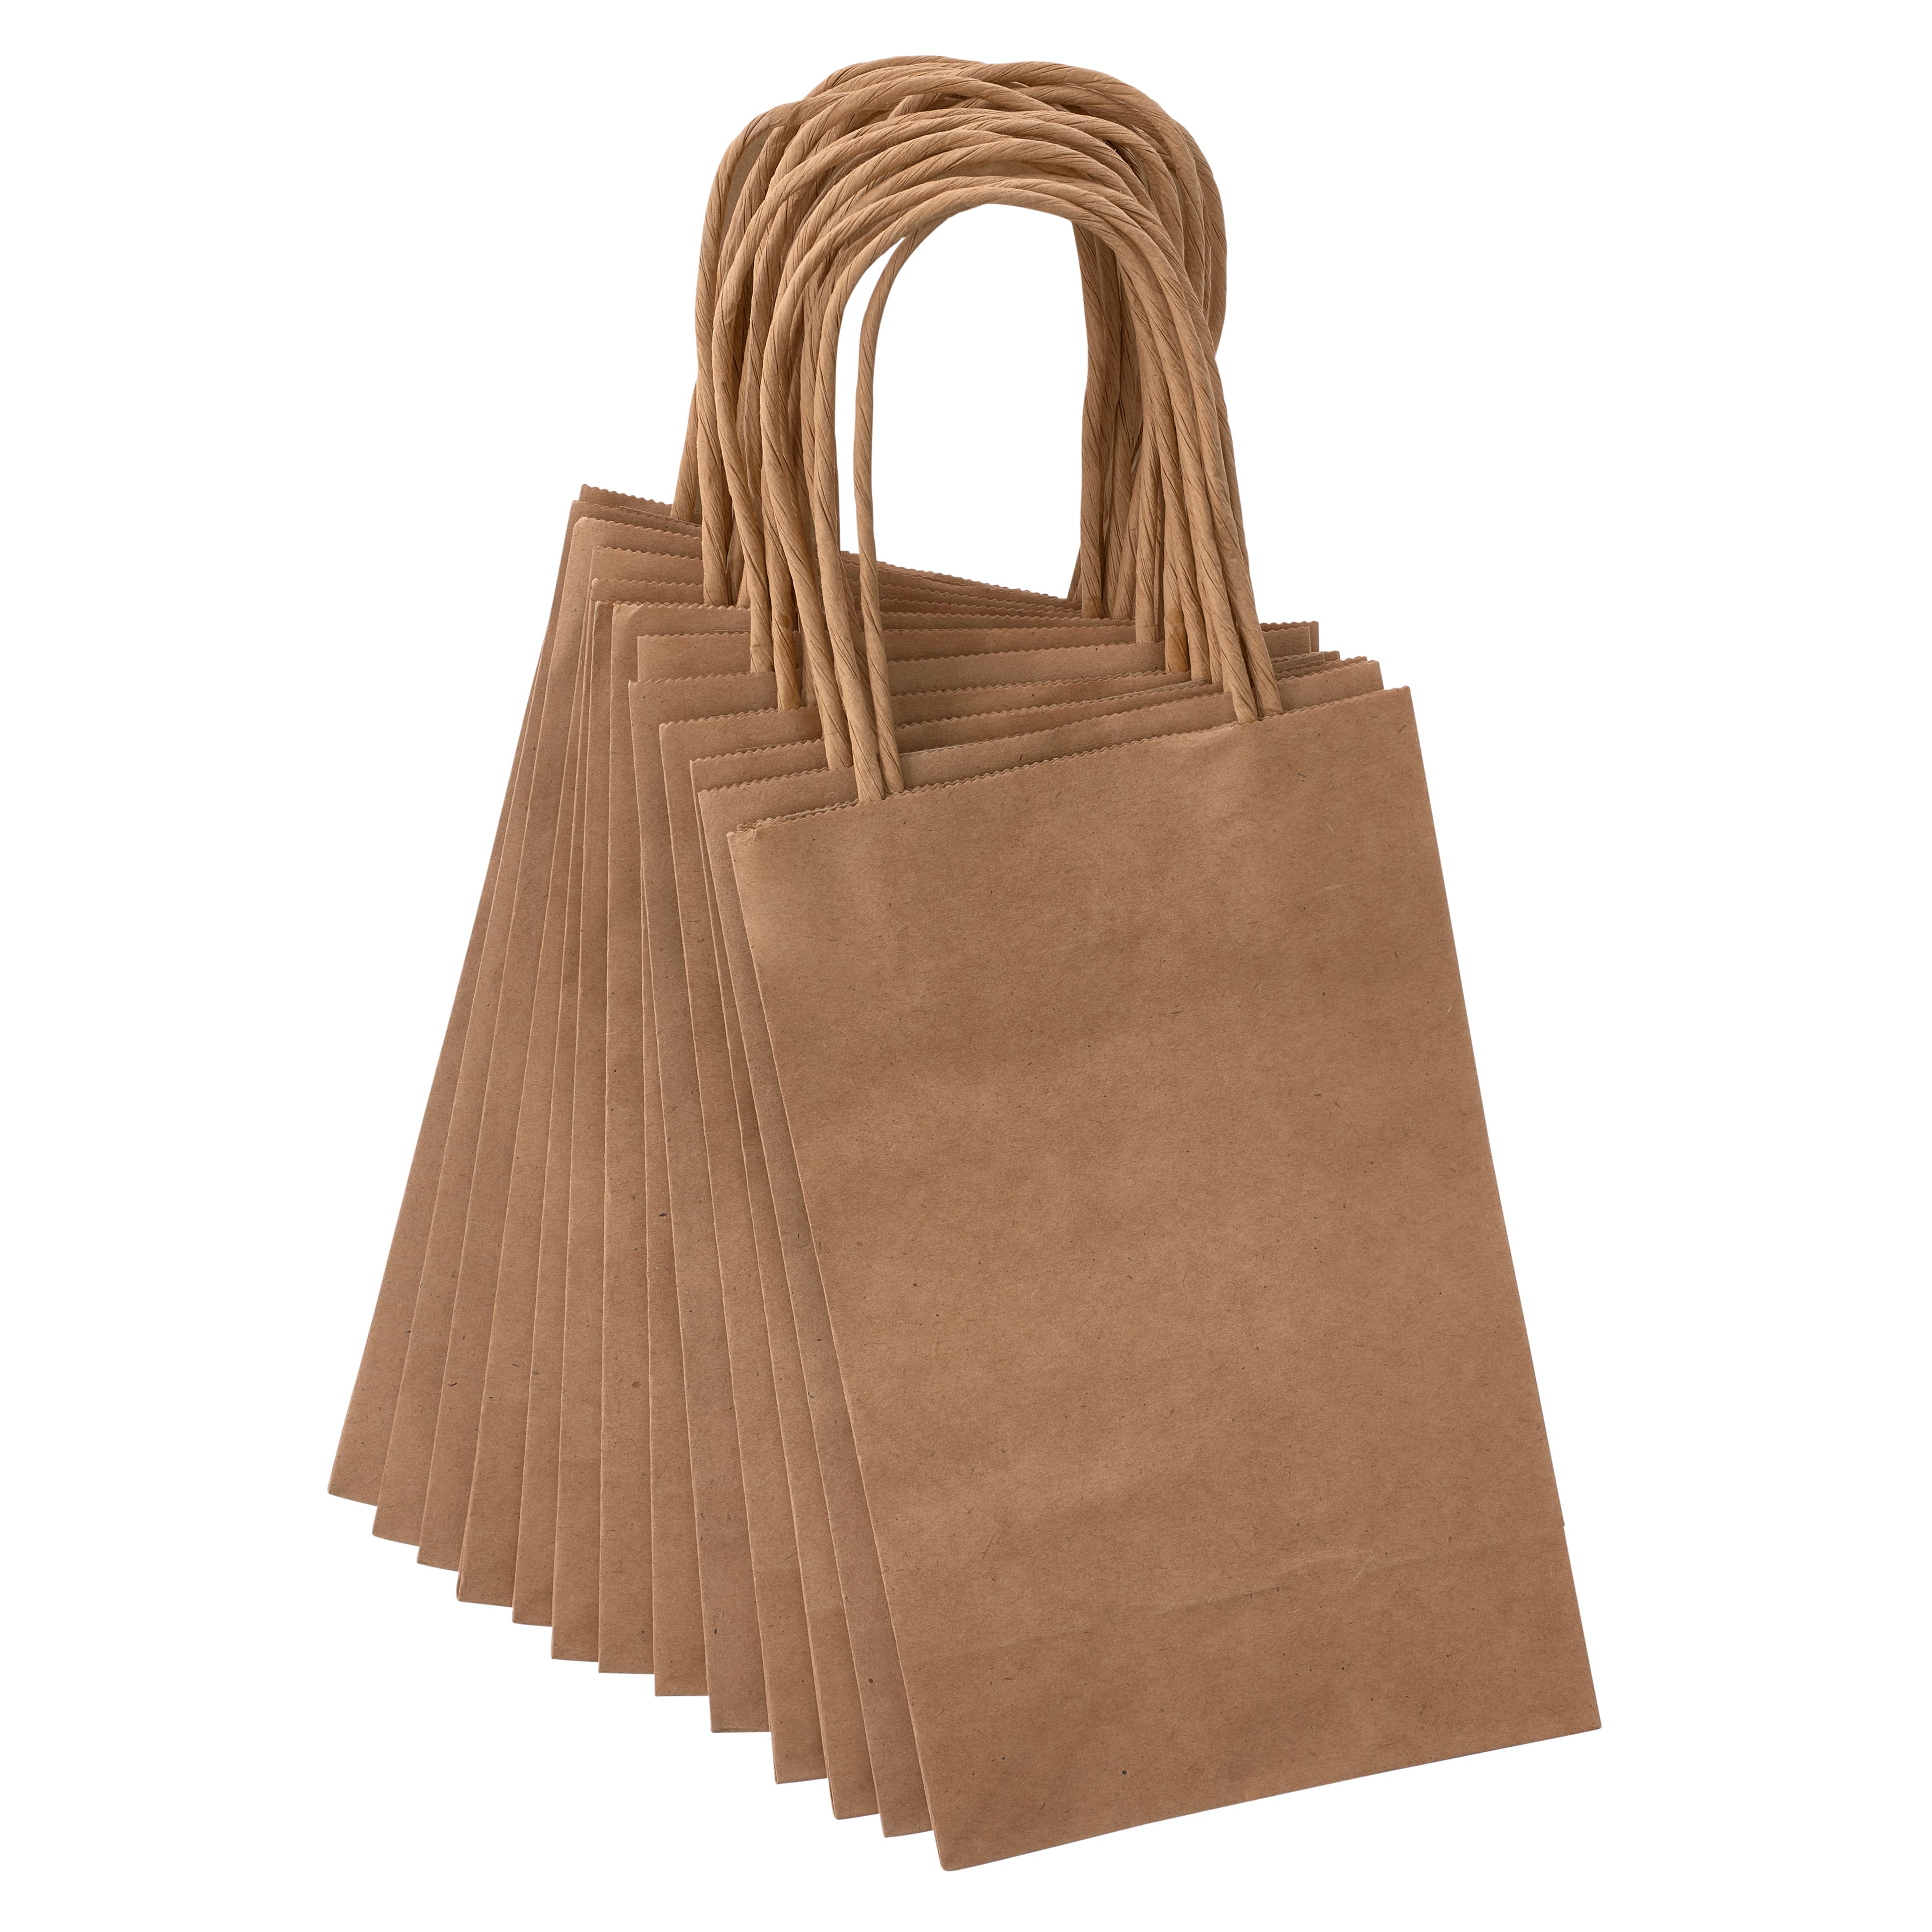 10 Packs: 13 ct. (130 total) Small Solid Gift Bags by Celebrate It&#x2122;